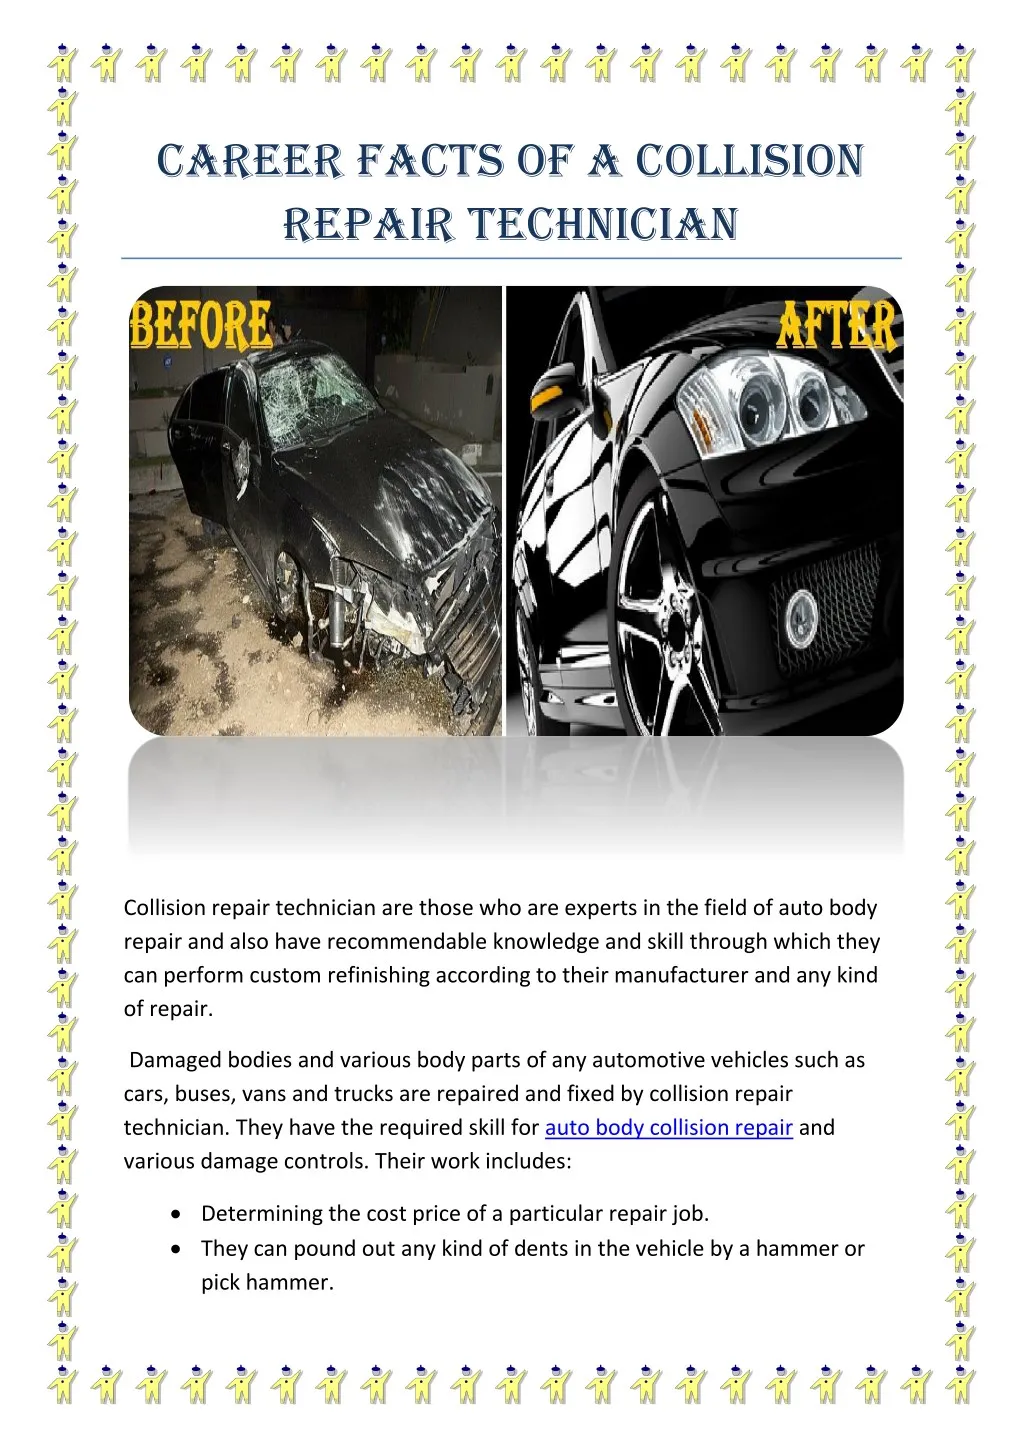 career facts of a collision repair technician